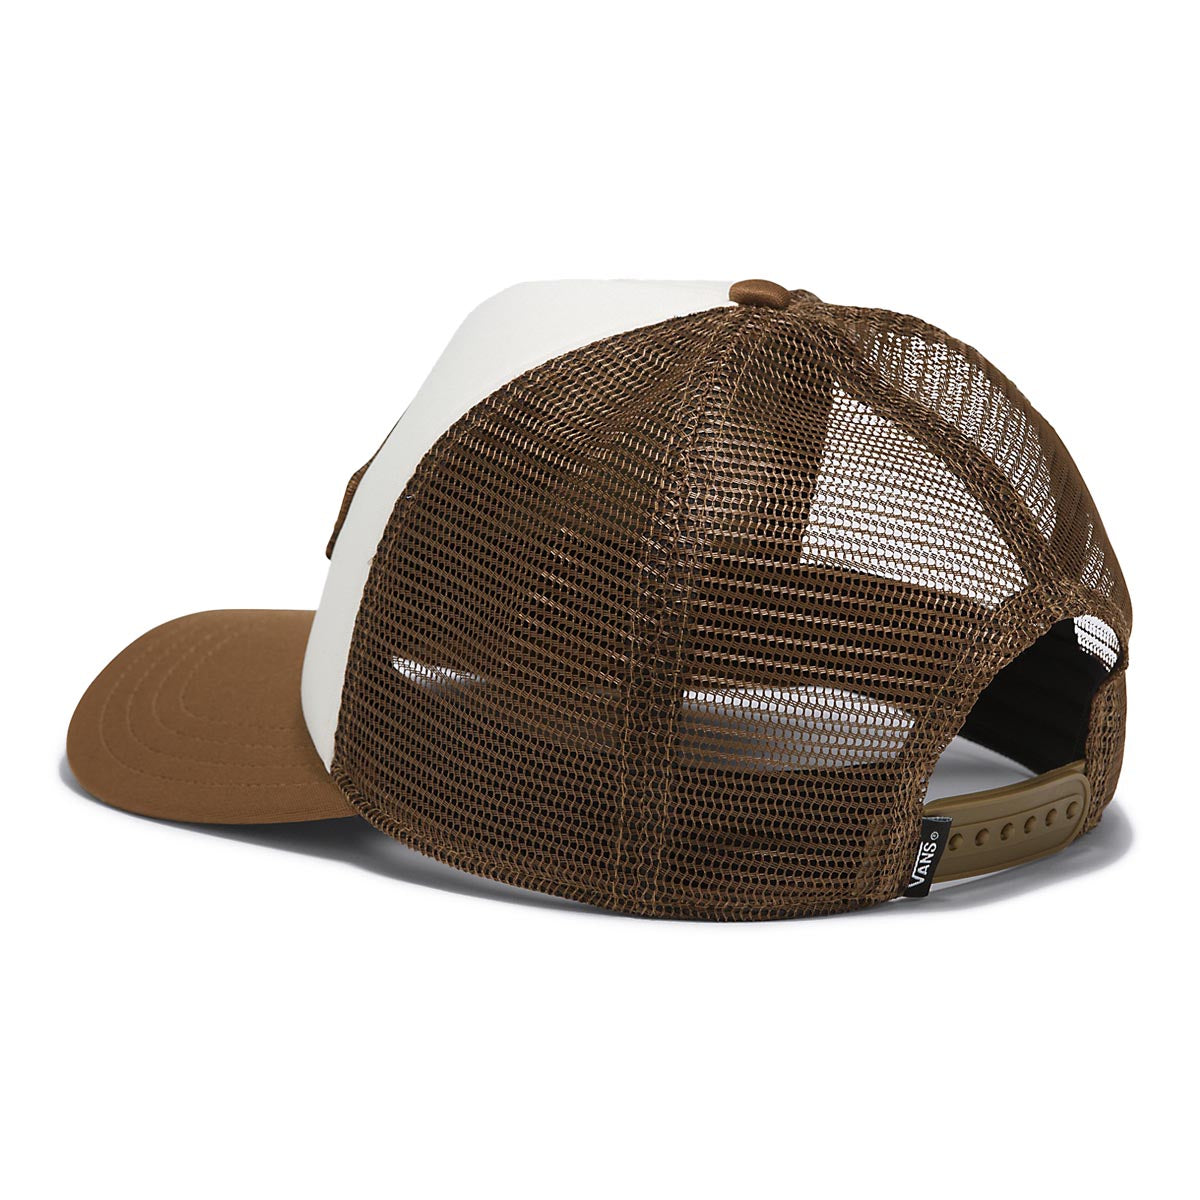 Vans Classic Patch Curved Bill Trucker Hat - Coffee Liqueur image 2